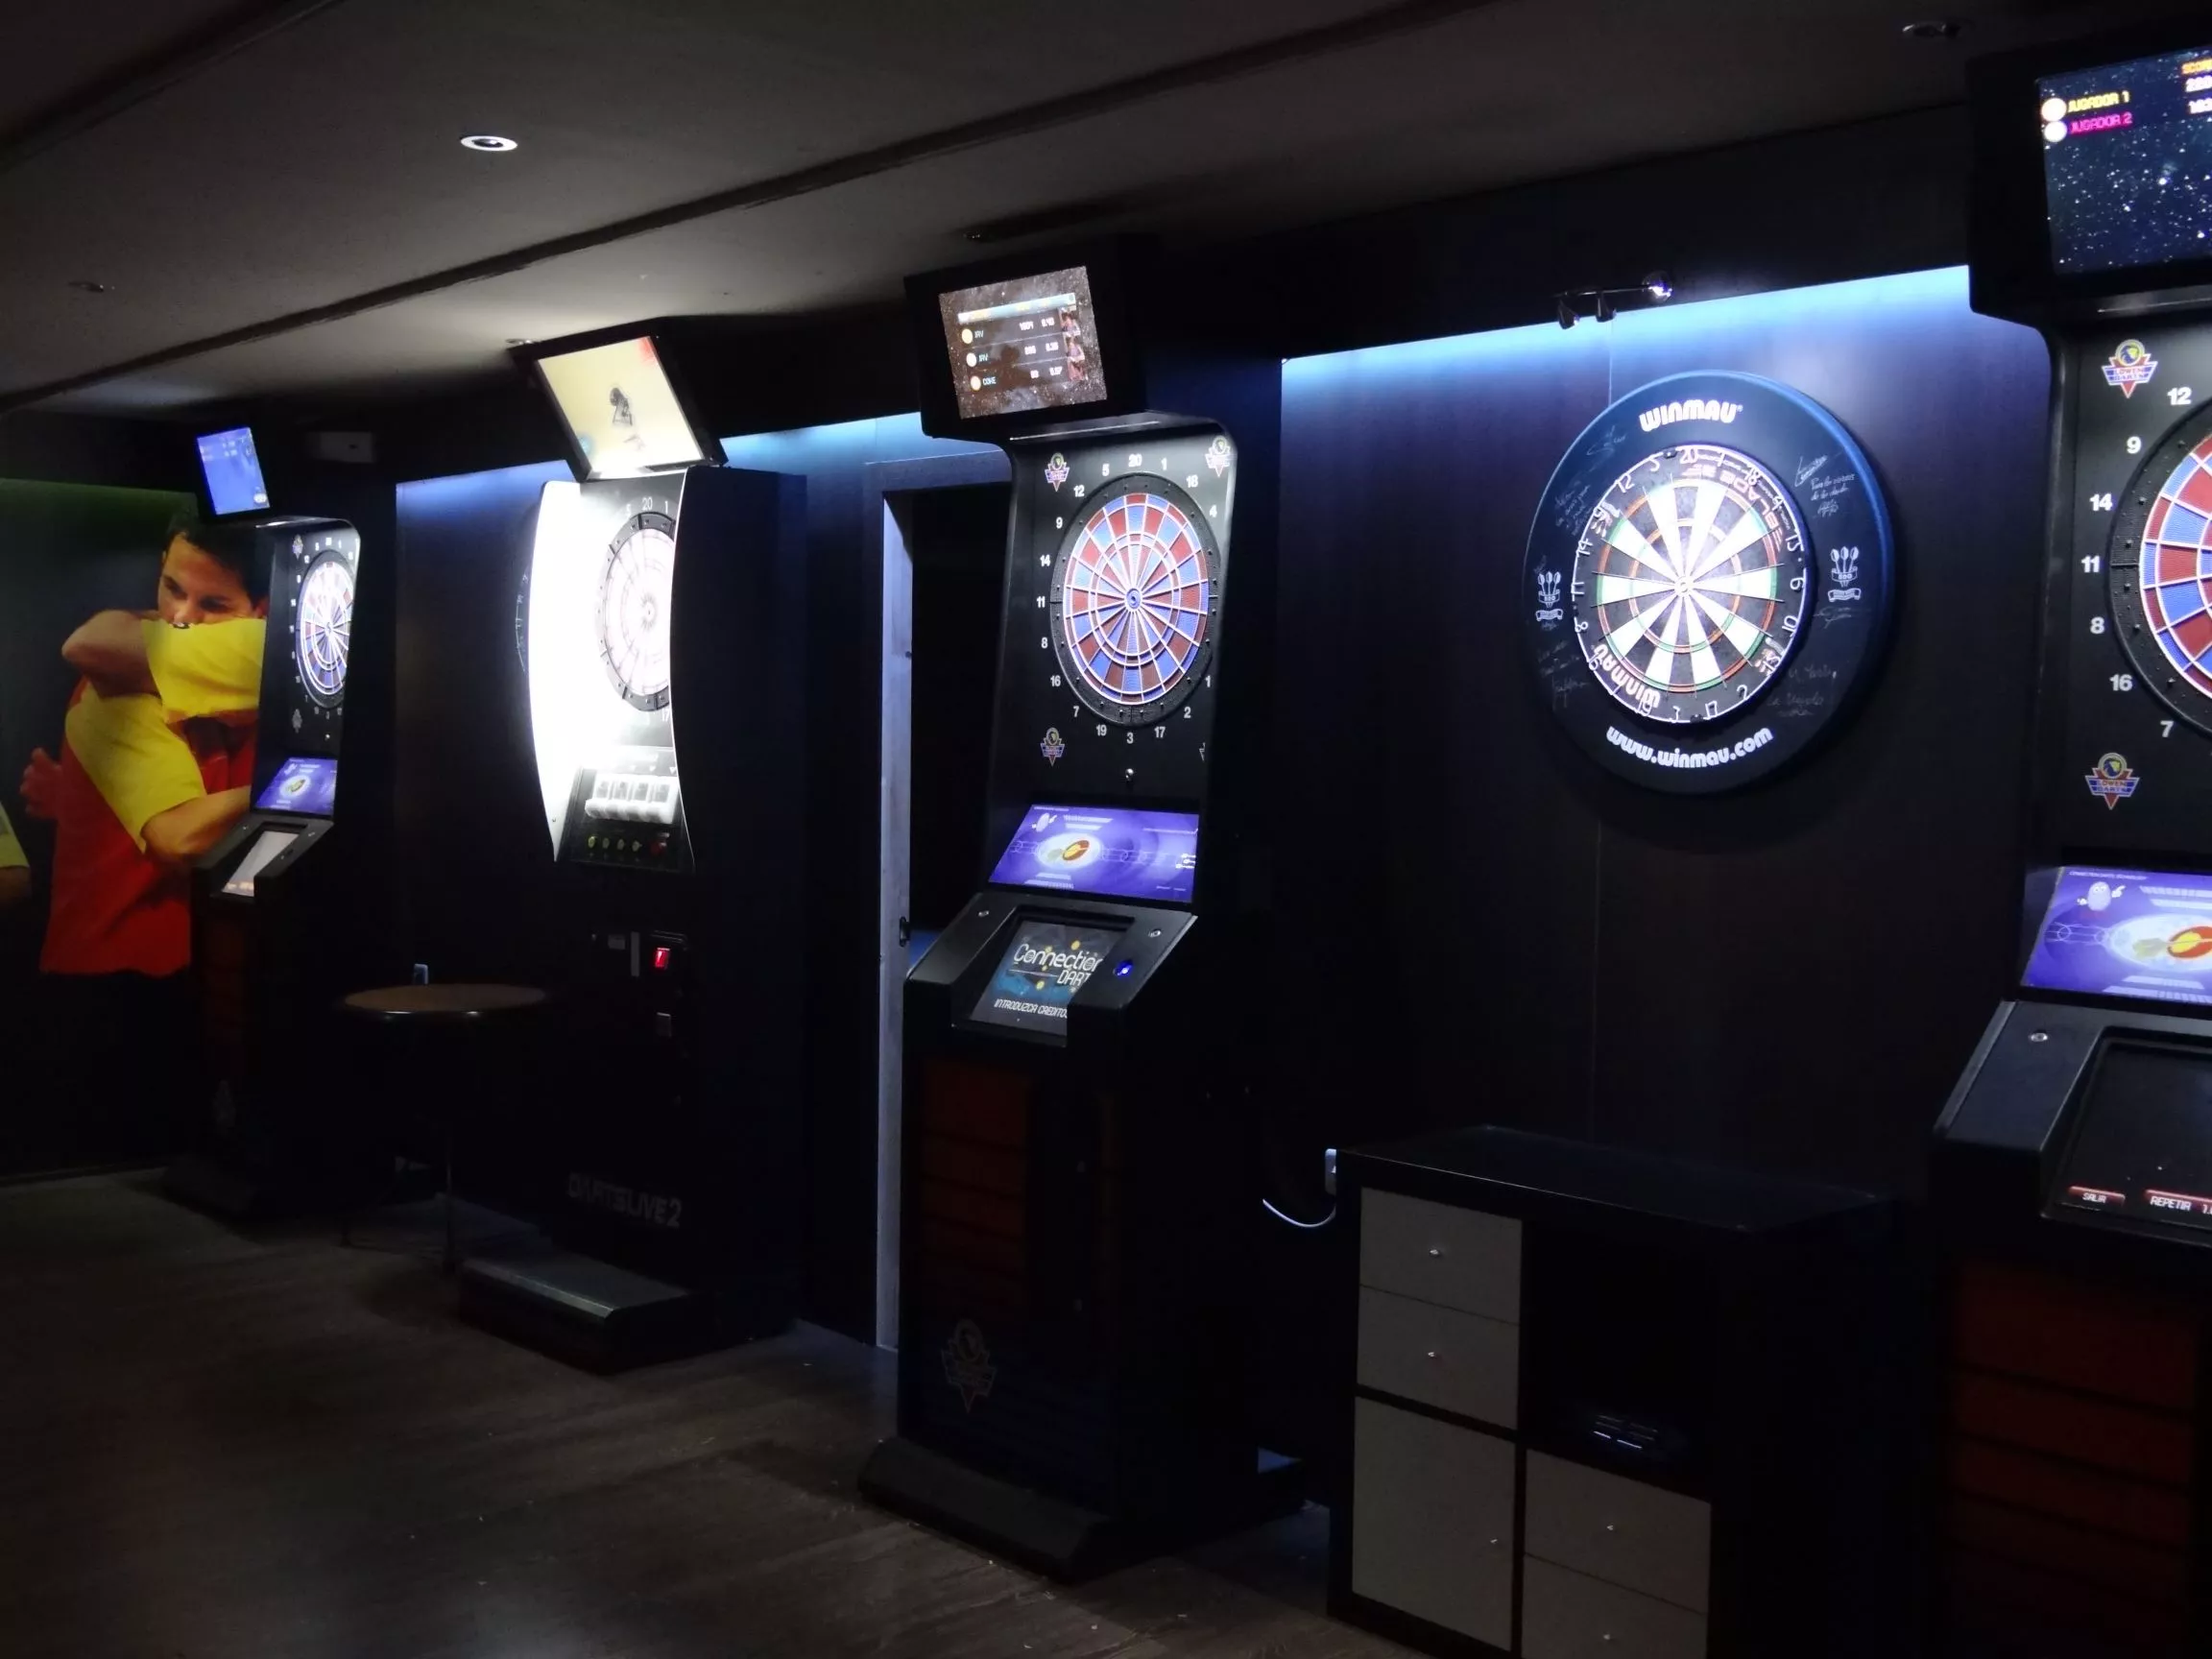 Darts Club Bare Nostrum in Spain, Europe | Pubs & Breweries,Darts - Rated 4.8